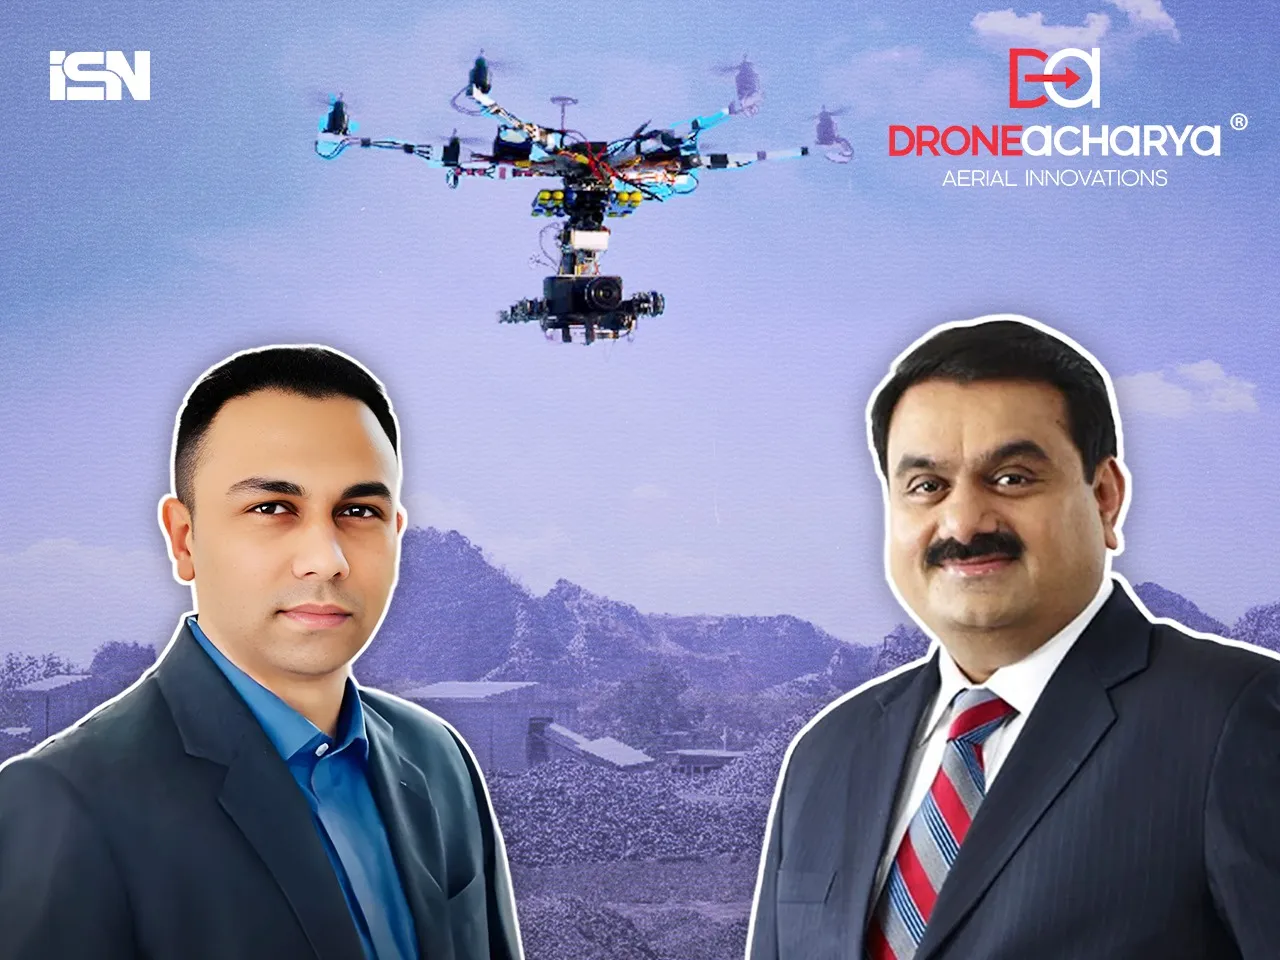 DroneAcharya secures order from Adani group